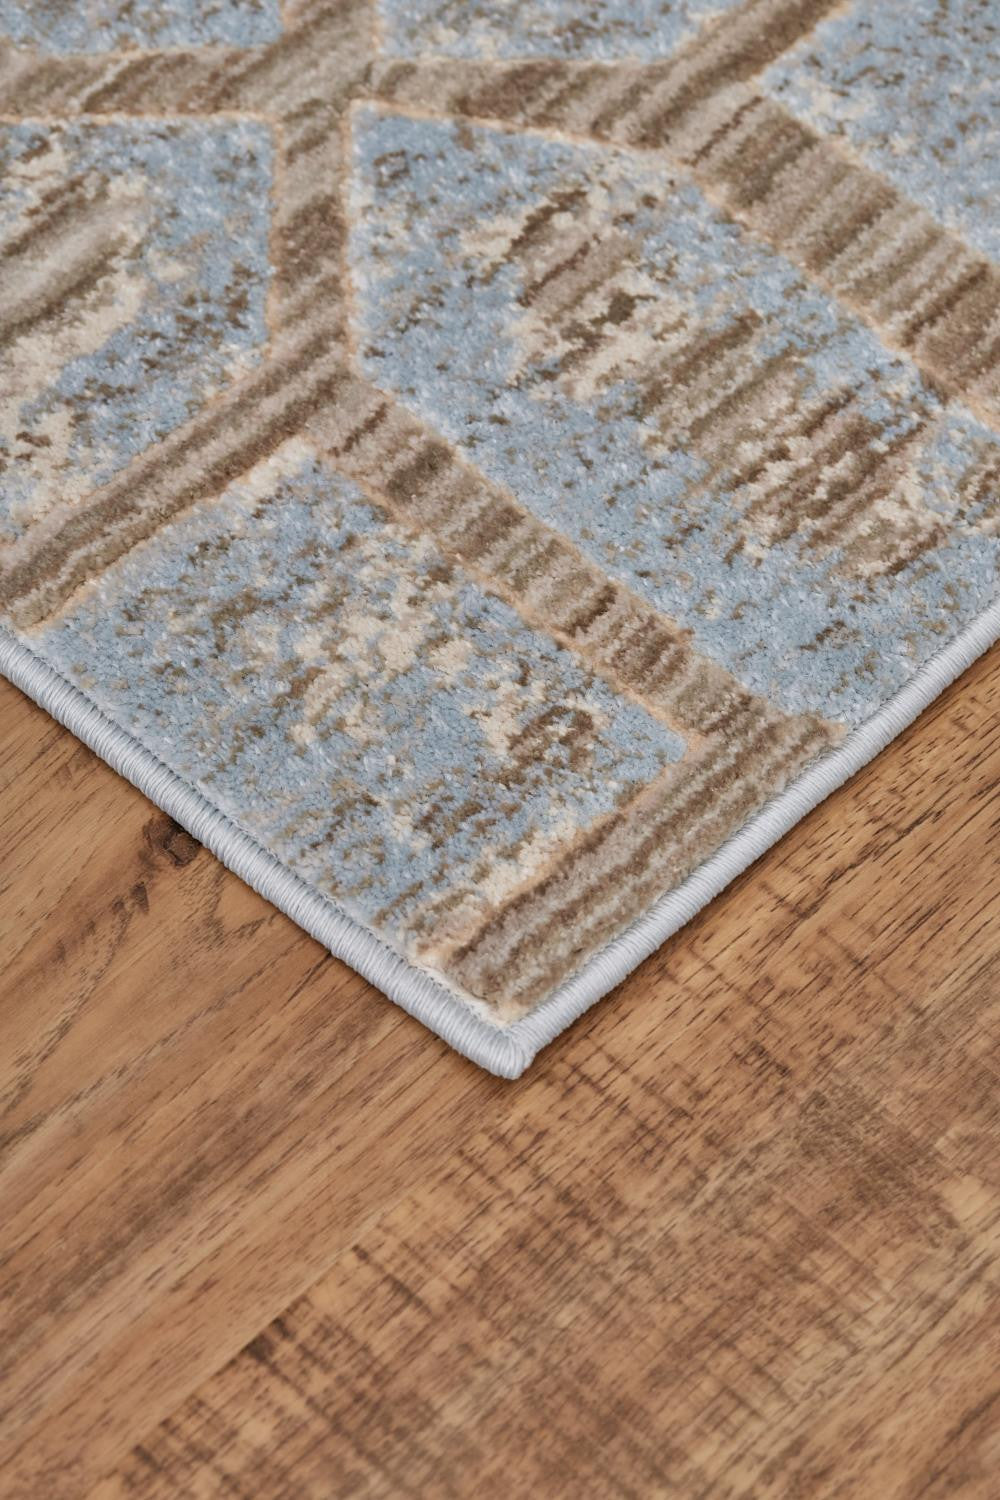 5' X 8' Blue Taupe And Ivory Floral Distressed Stain Resistant Area Rug